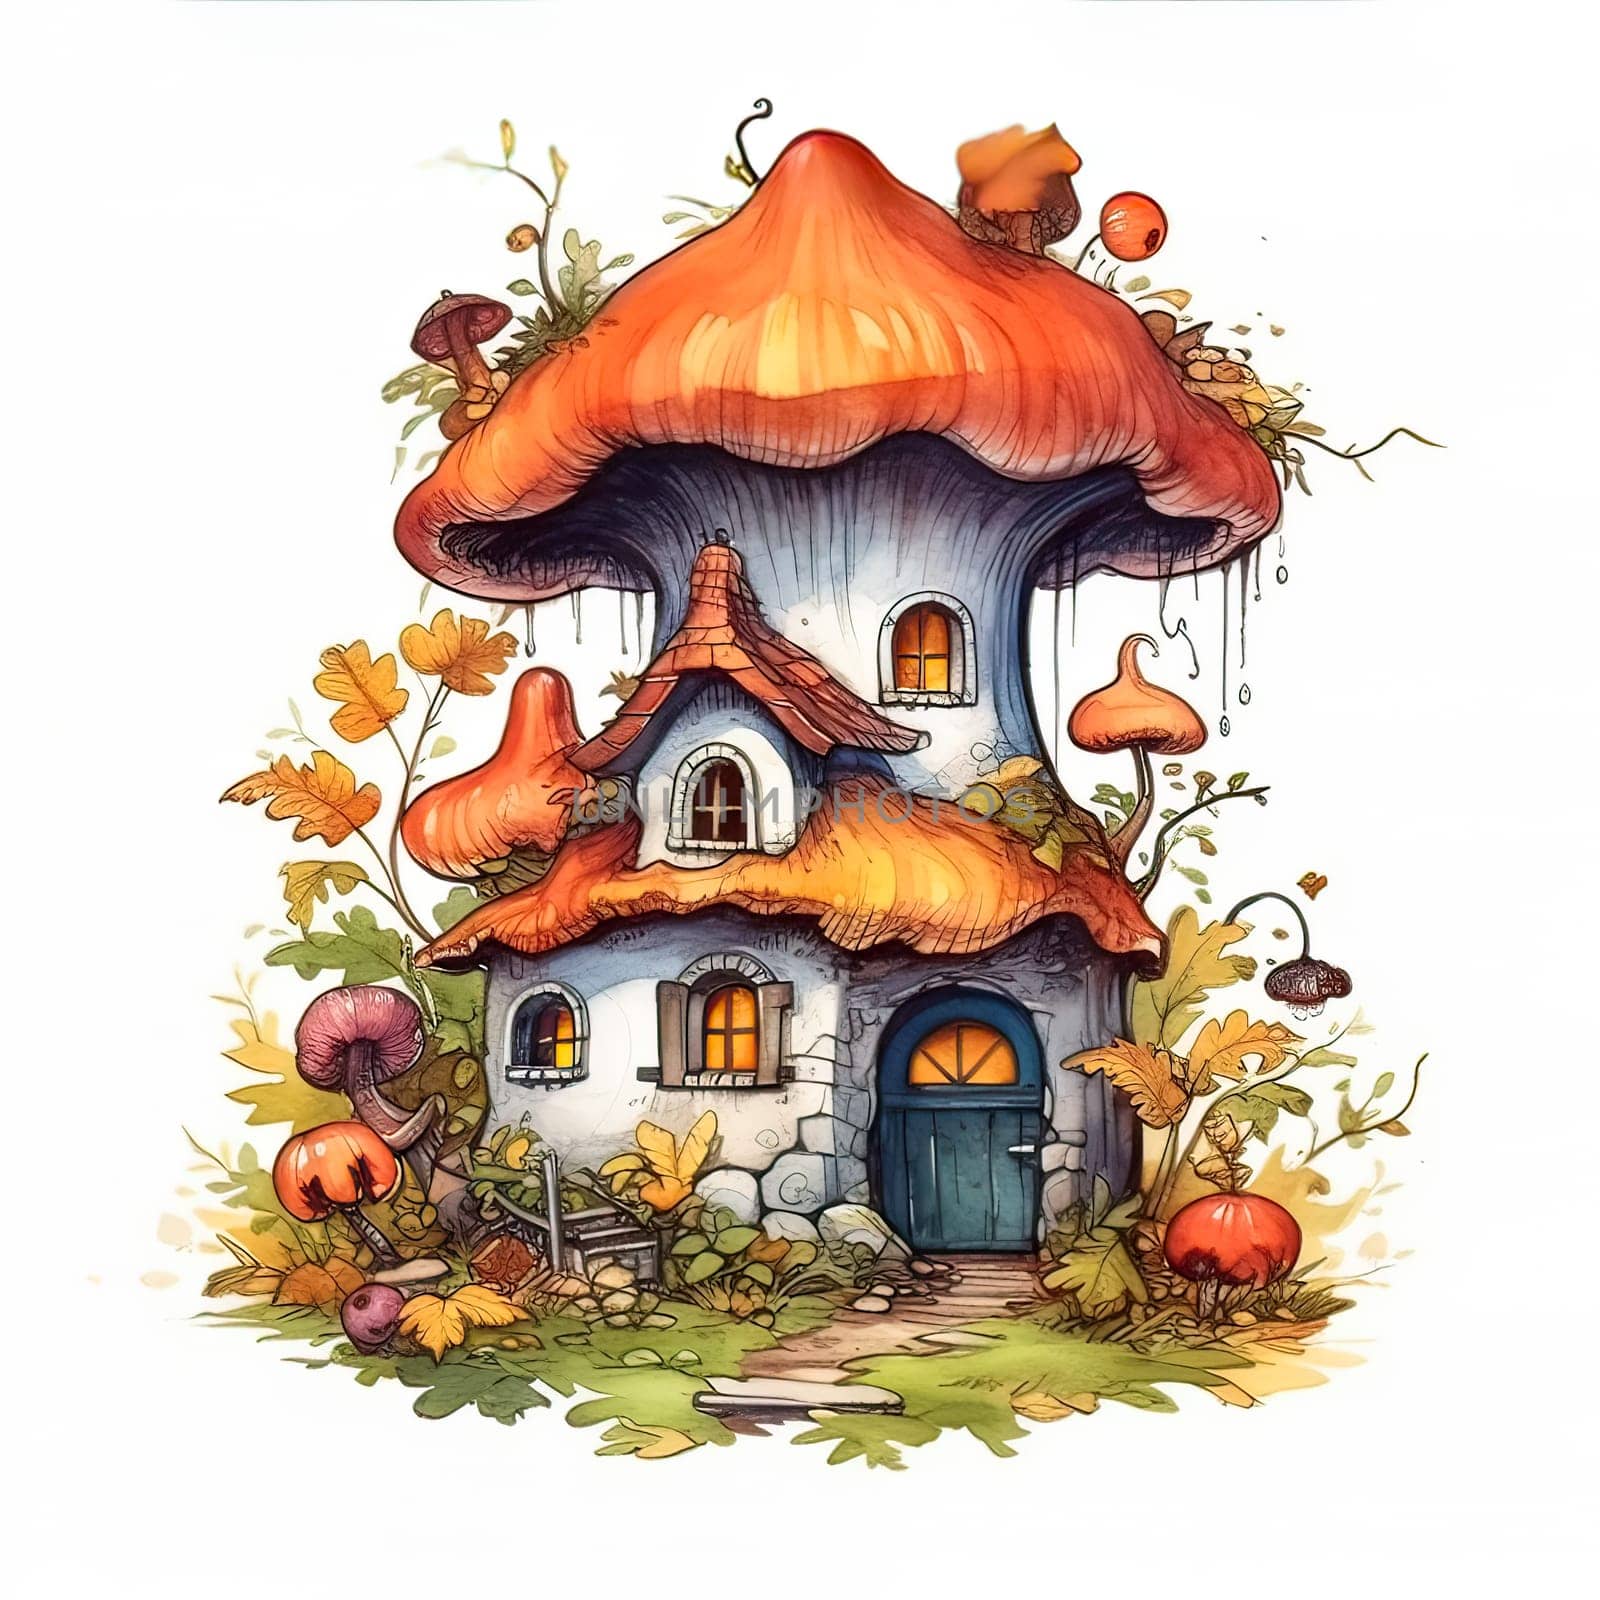 A house made of mushrooms with a blue door. The house is surrounded by plants and has a garden